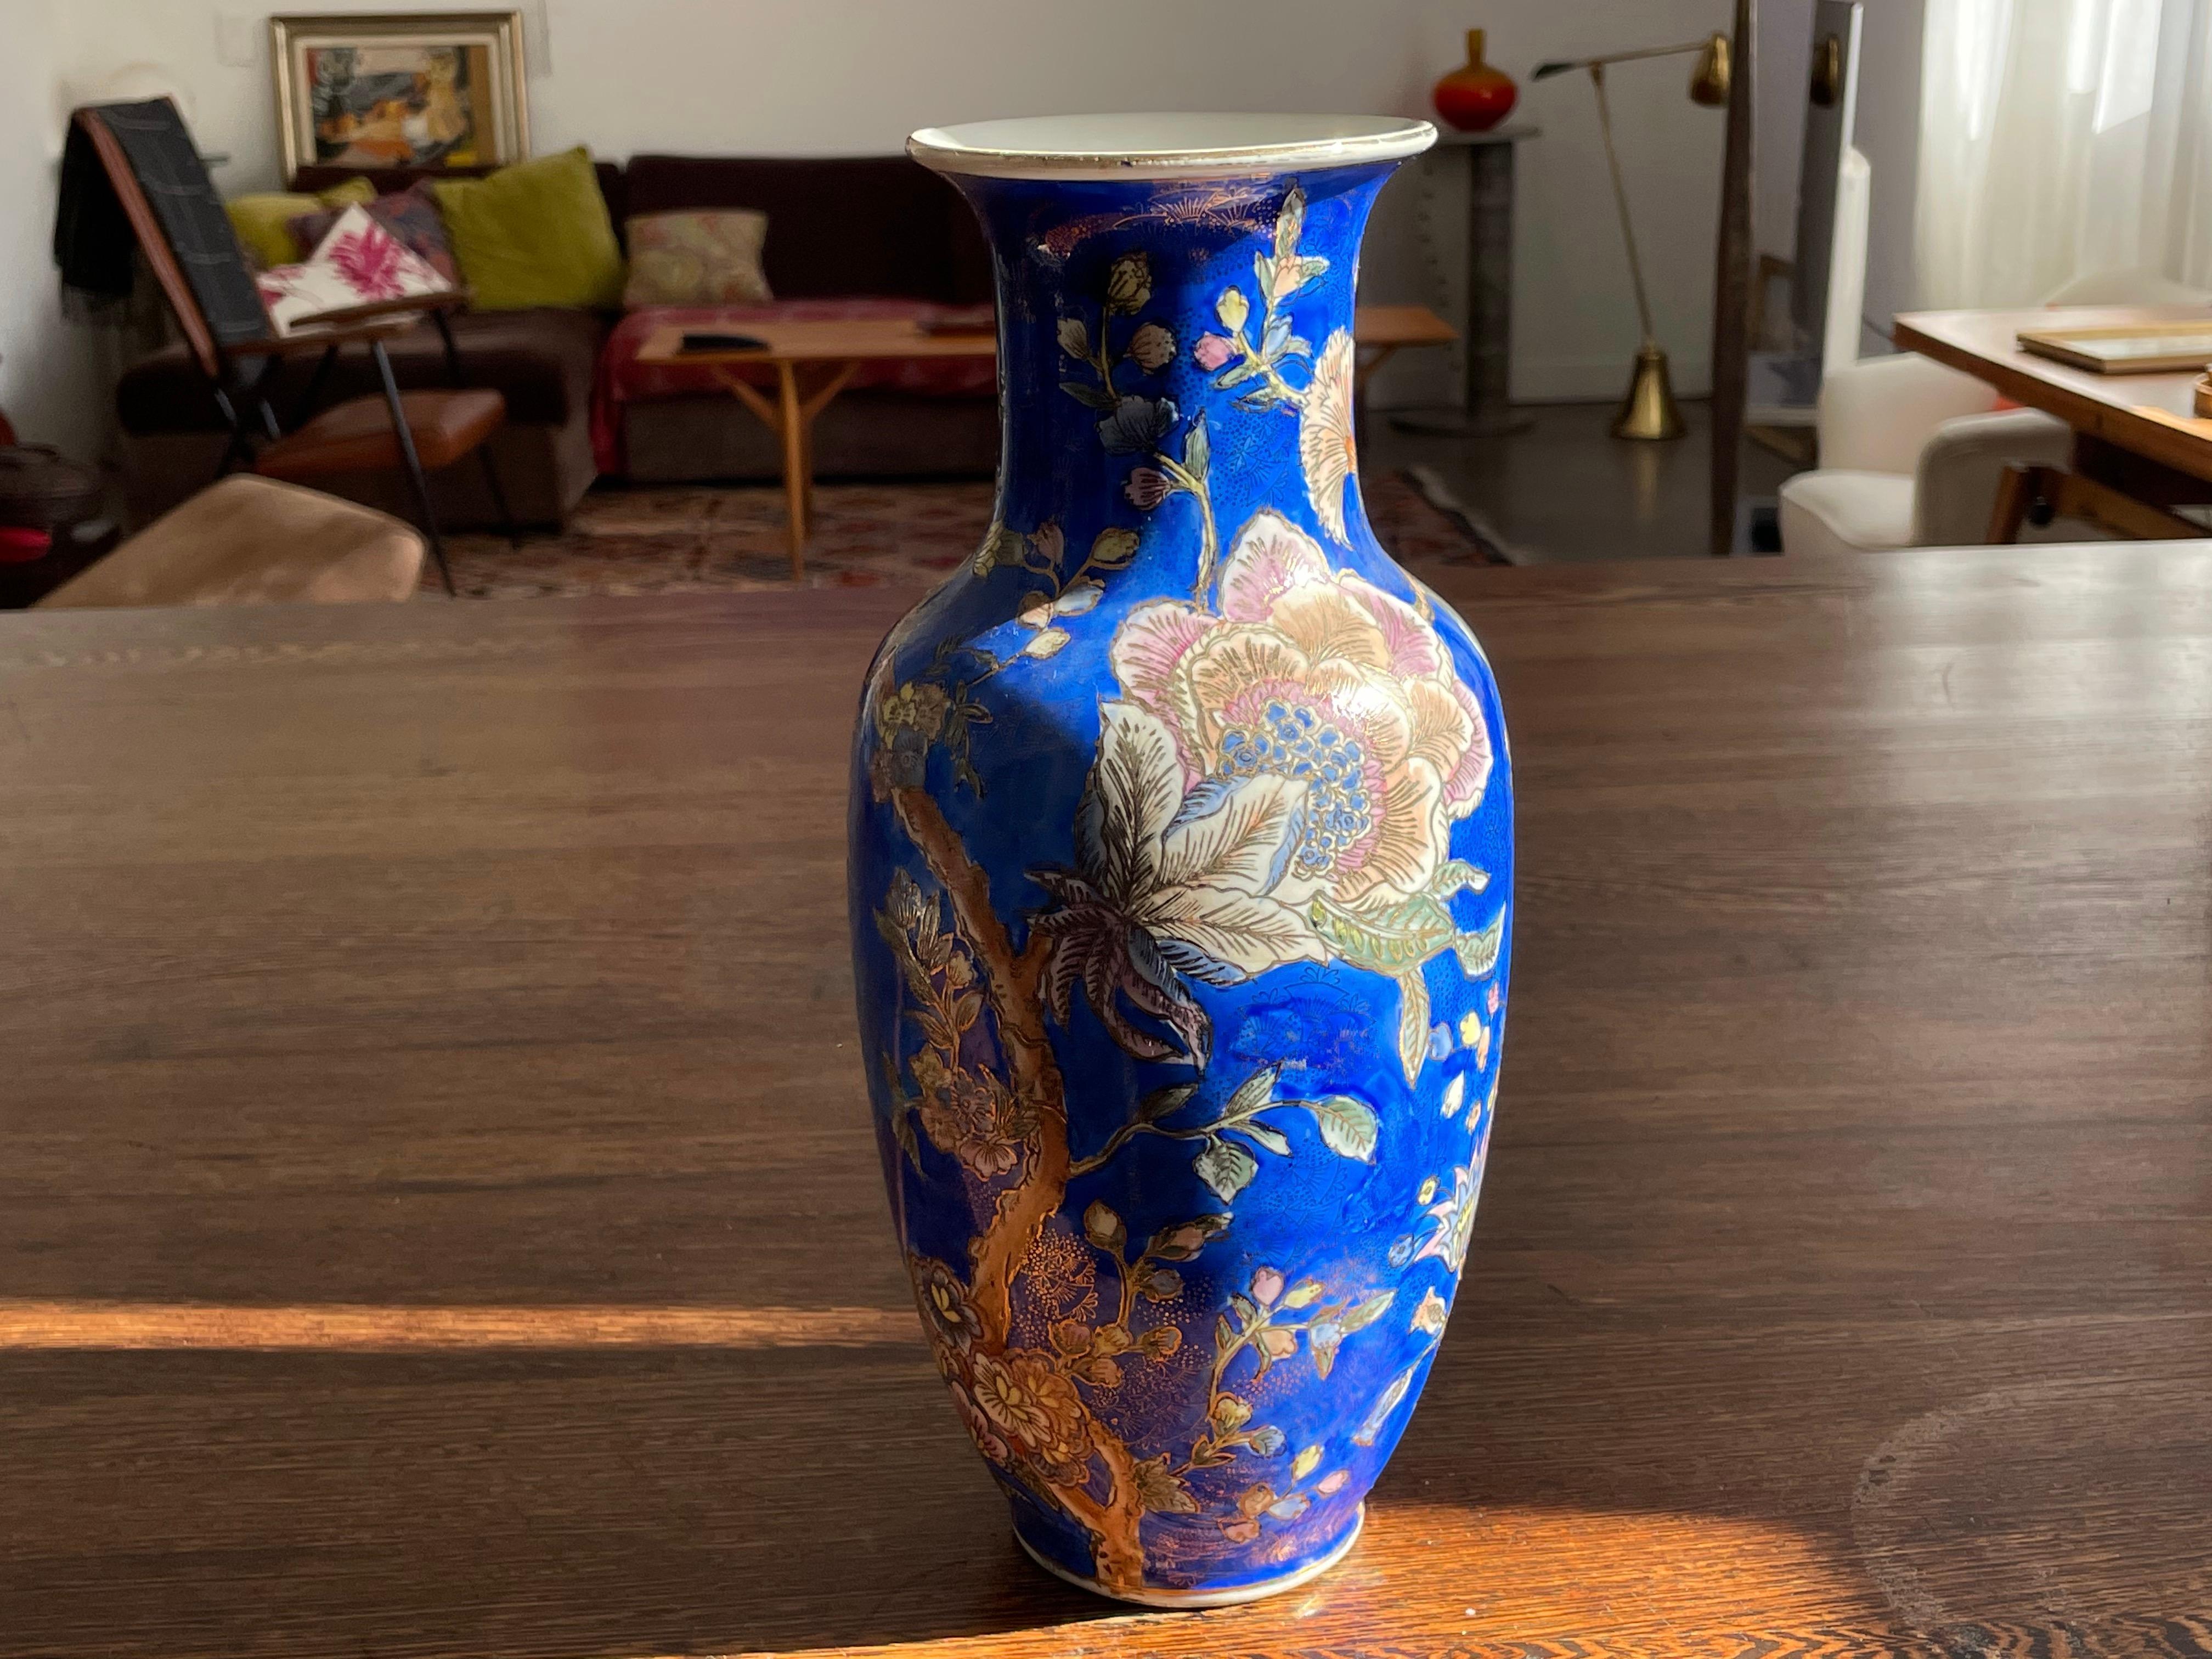 A vintage Chinese porcelain vase probably from the 1960's in blue enamel decorated with beautiful flowers and delicate gold handpainted painted details. 
Signed.
  
We’re an exhibition space and an online destination established by the passionate